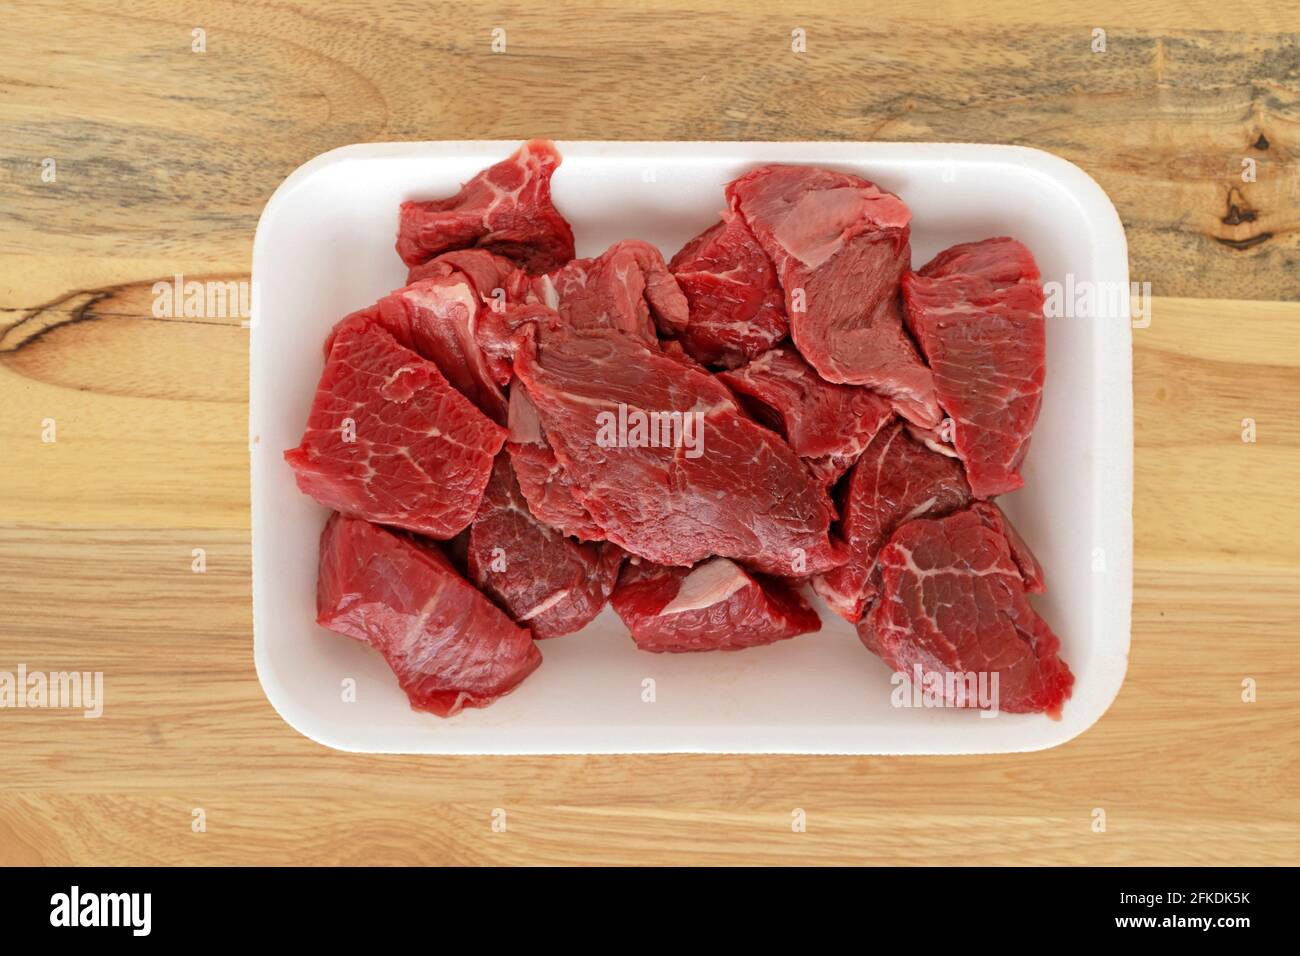 Package of Stewing Beef, Raw Meat Pieces, Chopped Stock Photo